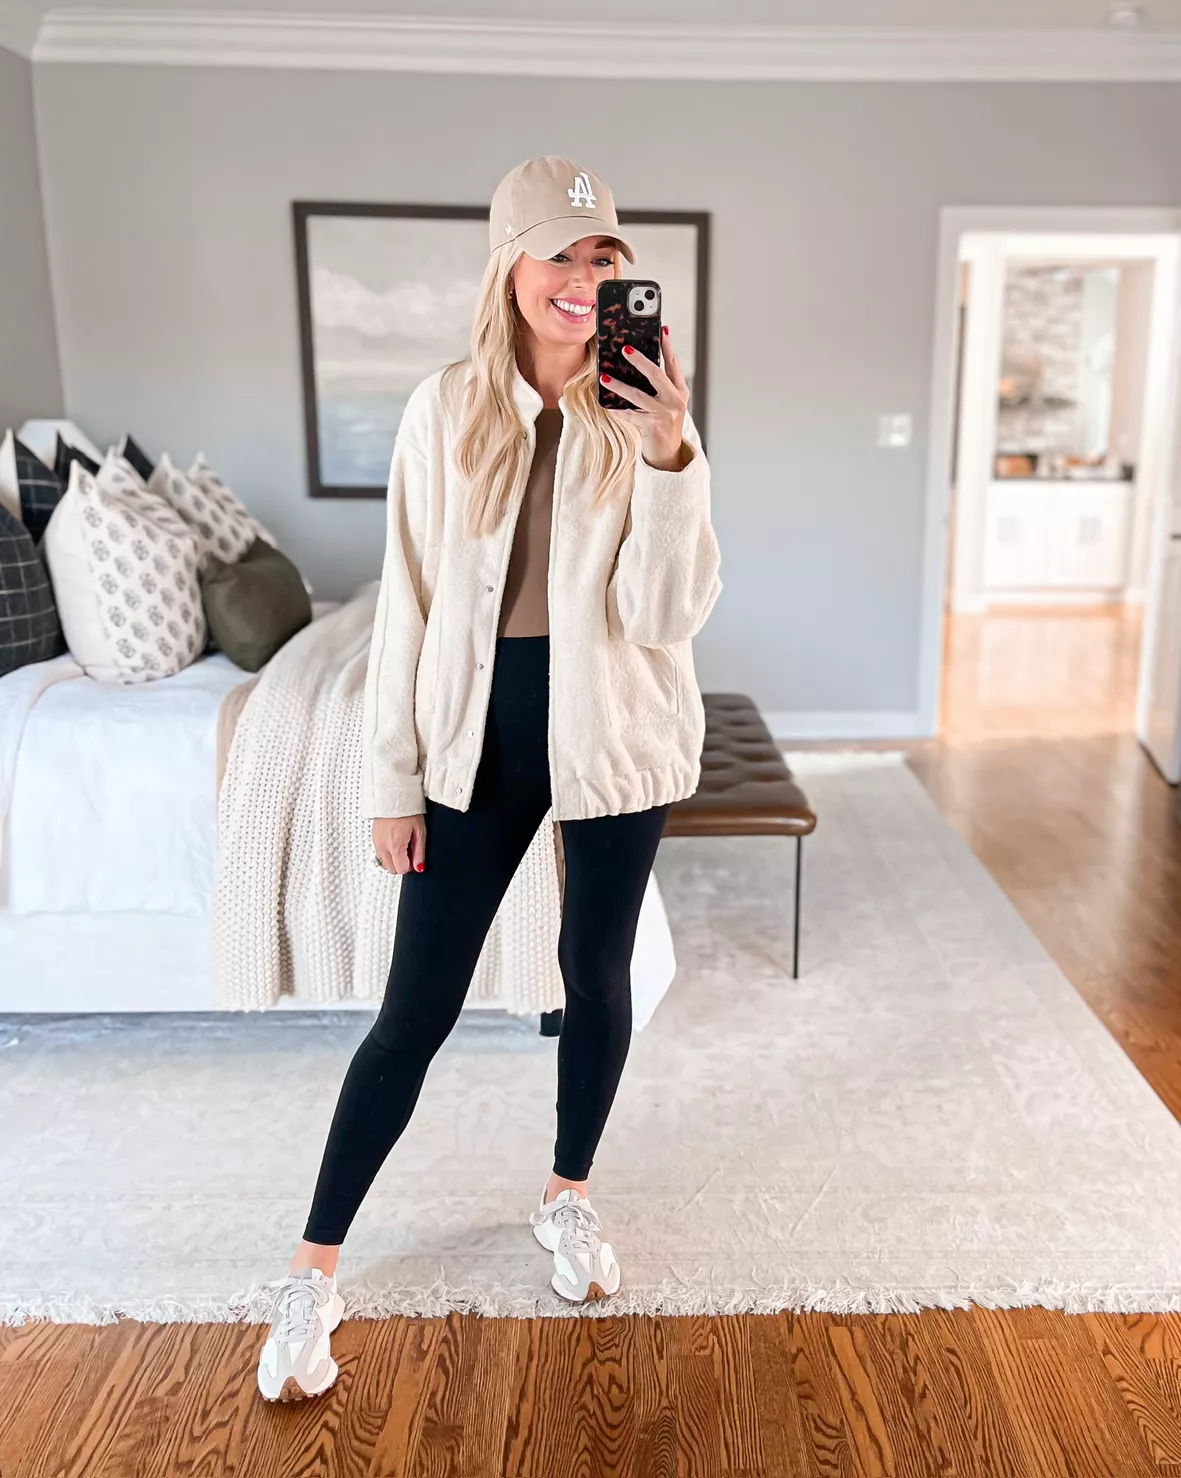 Outfit Inspo, Cute Outfits, Winter Outfits